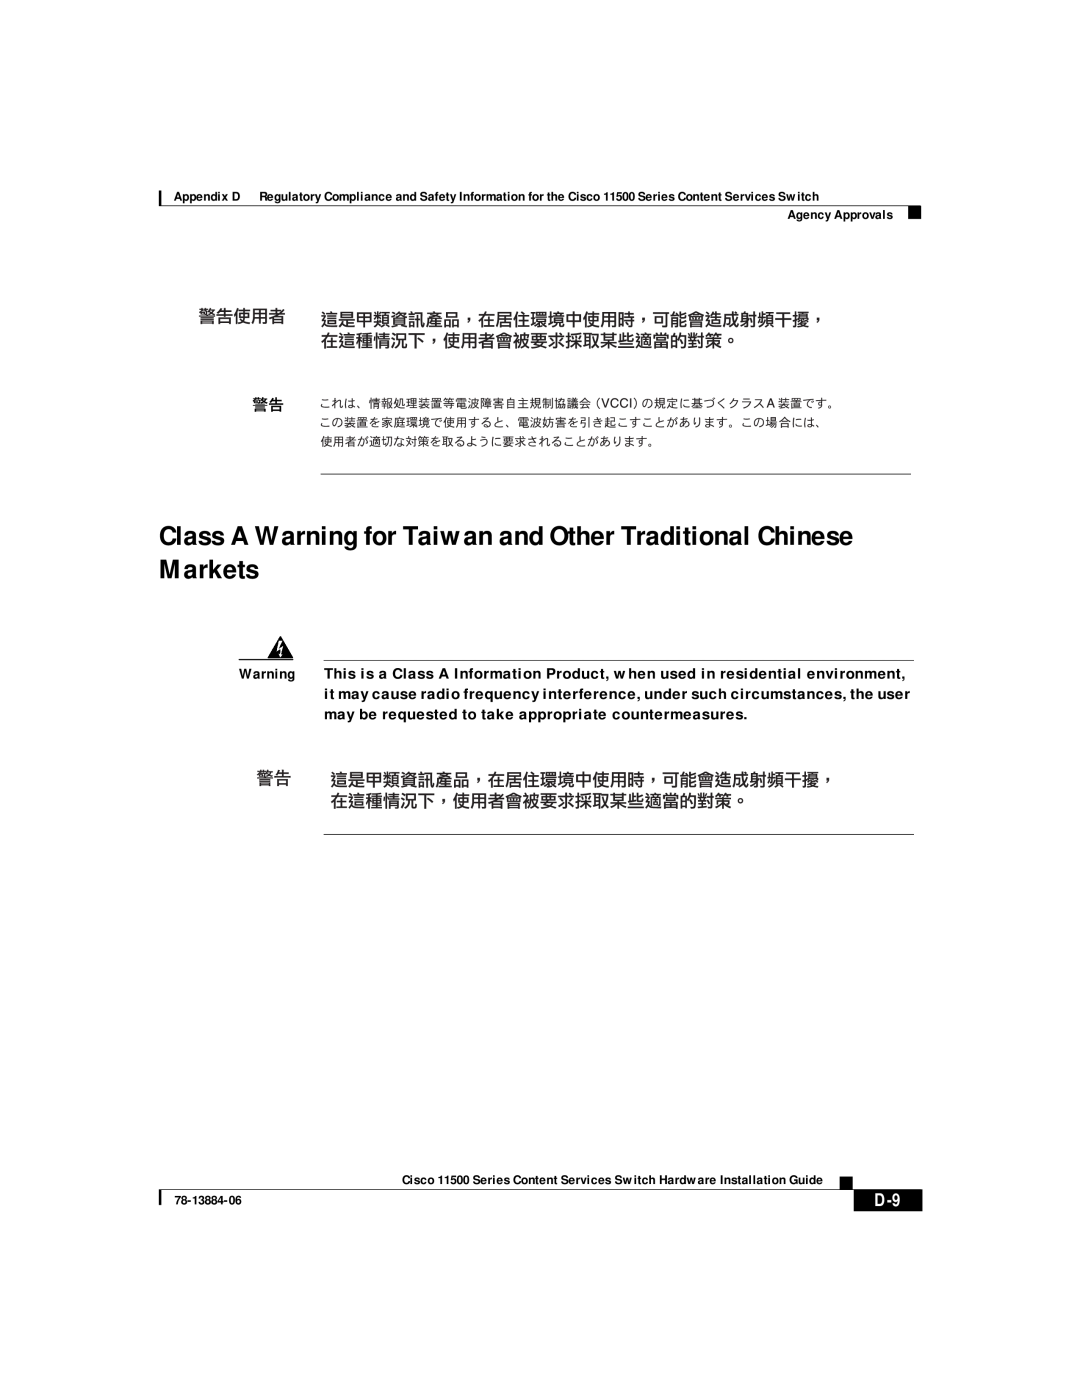 Cisco Systems 11503, 11506, 11501, 11500 appendix Class A Warning for Taiwan and Other Traditional Chinese Markets 